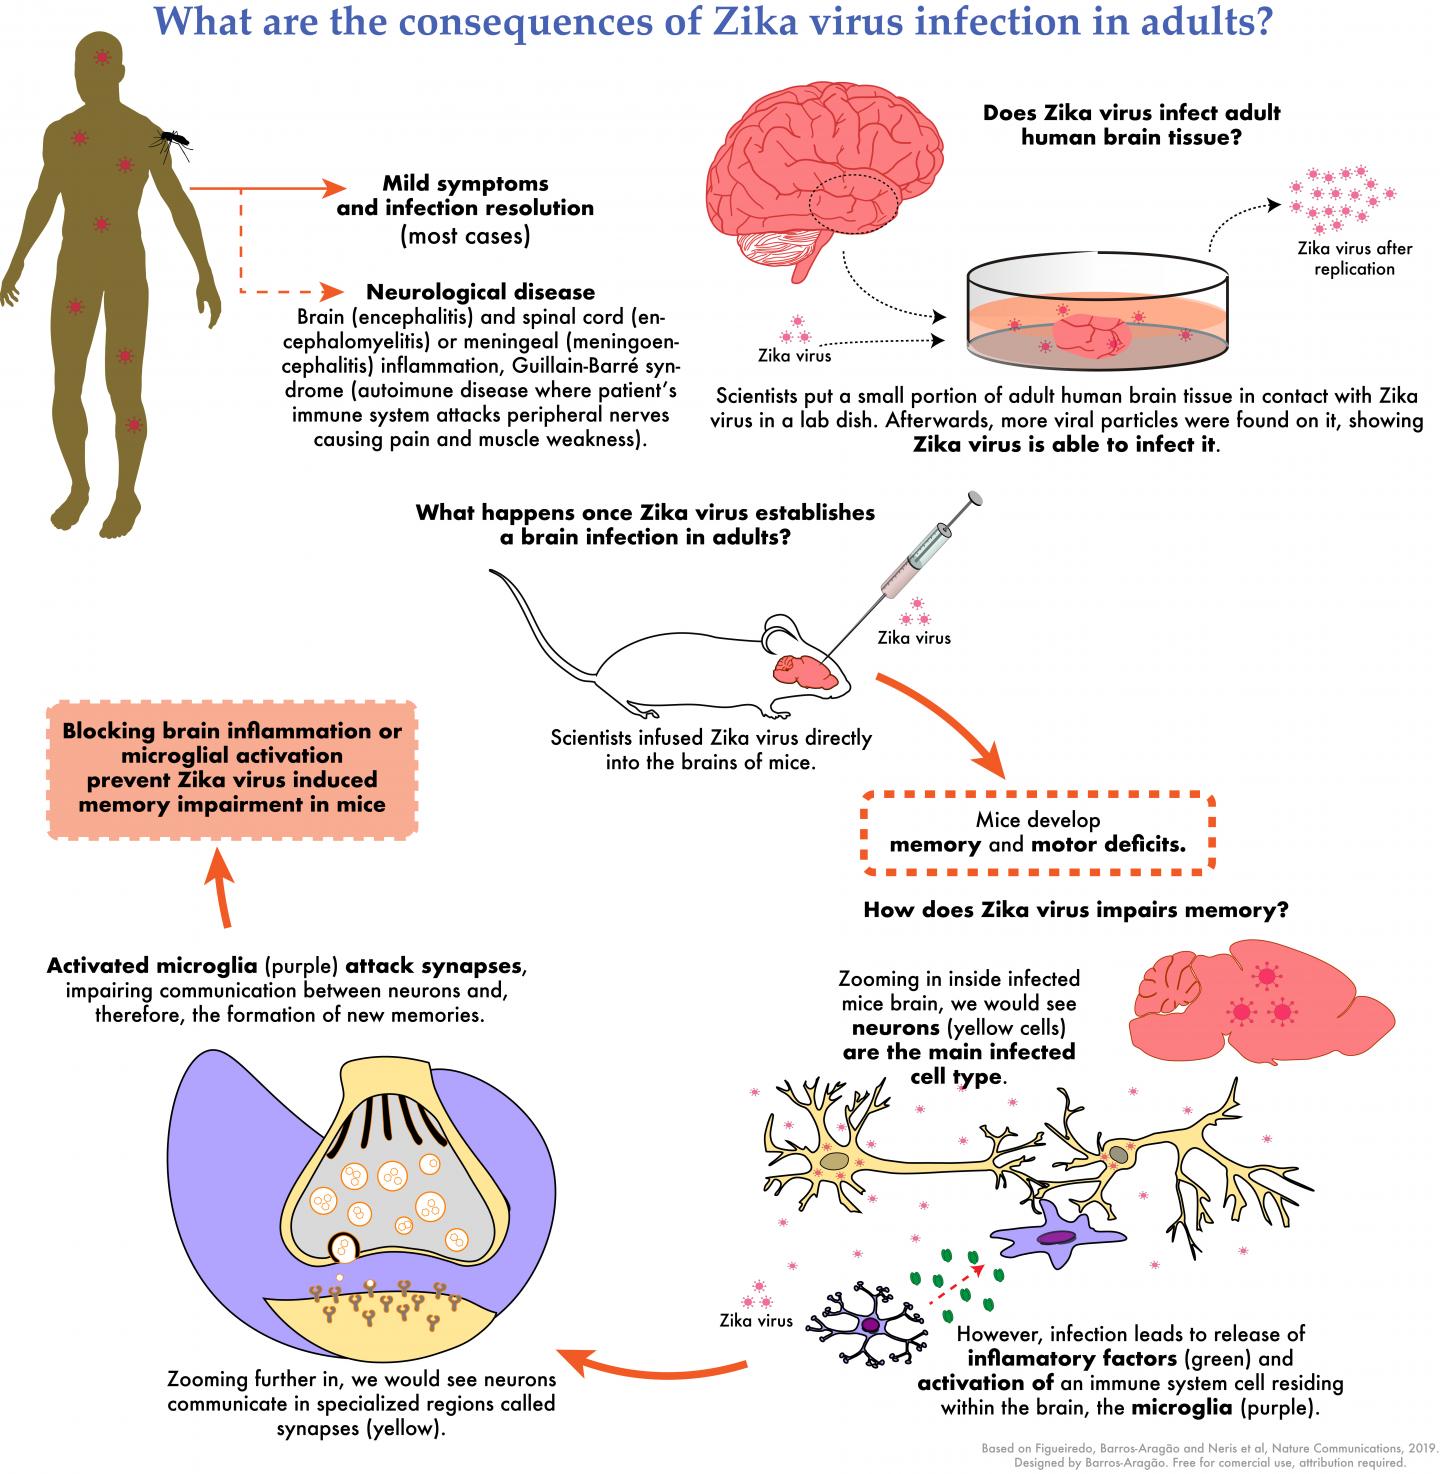 Consequences of Zika Virus Adult Infection